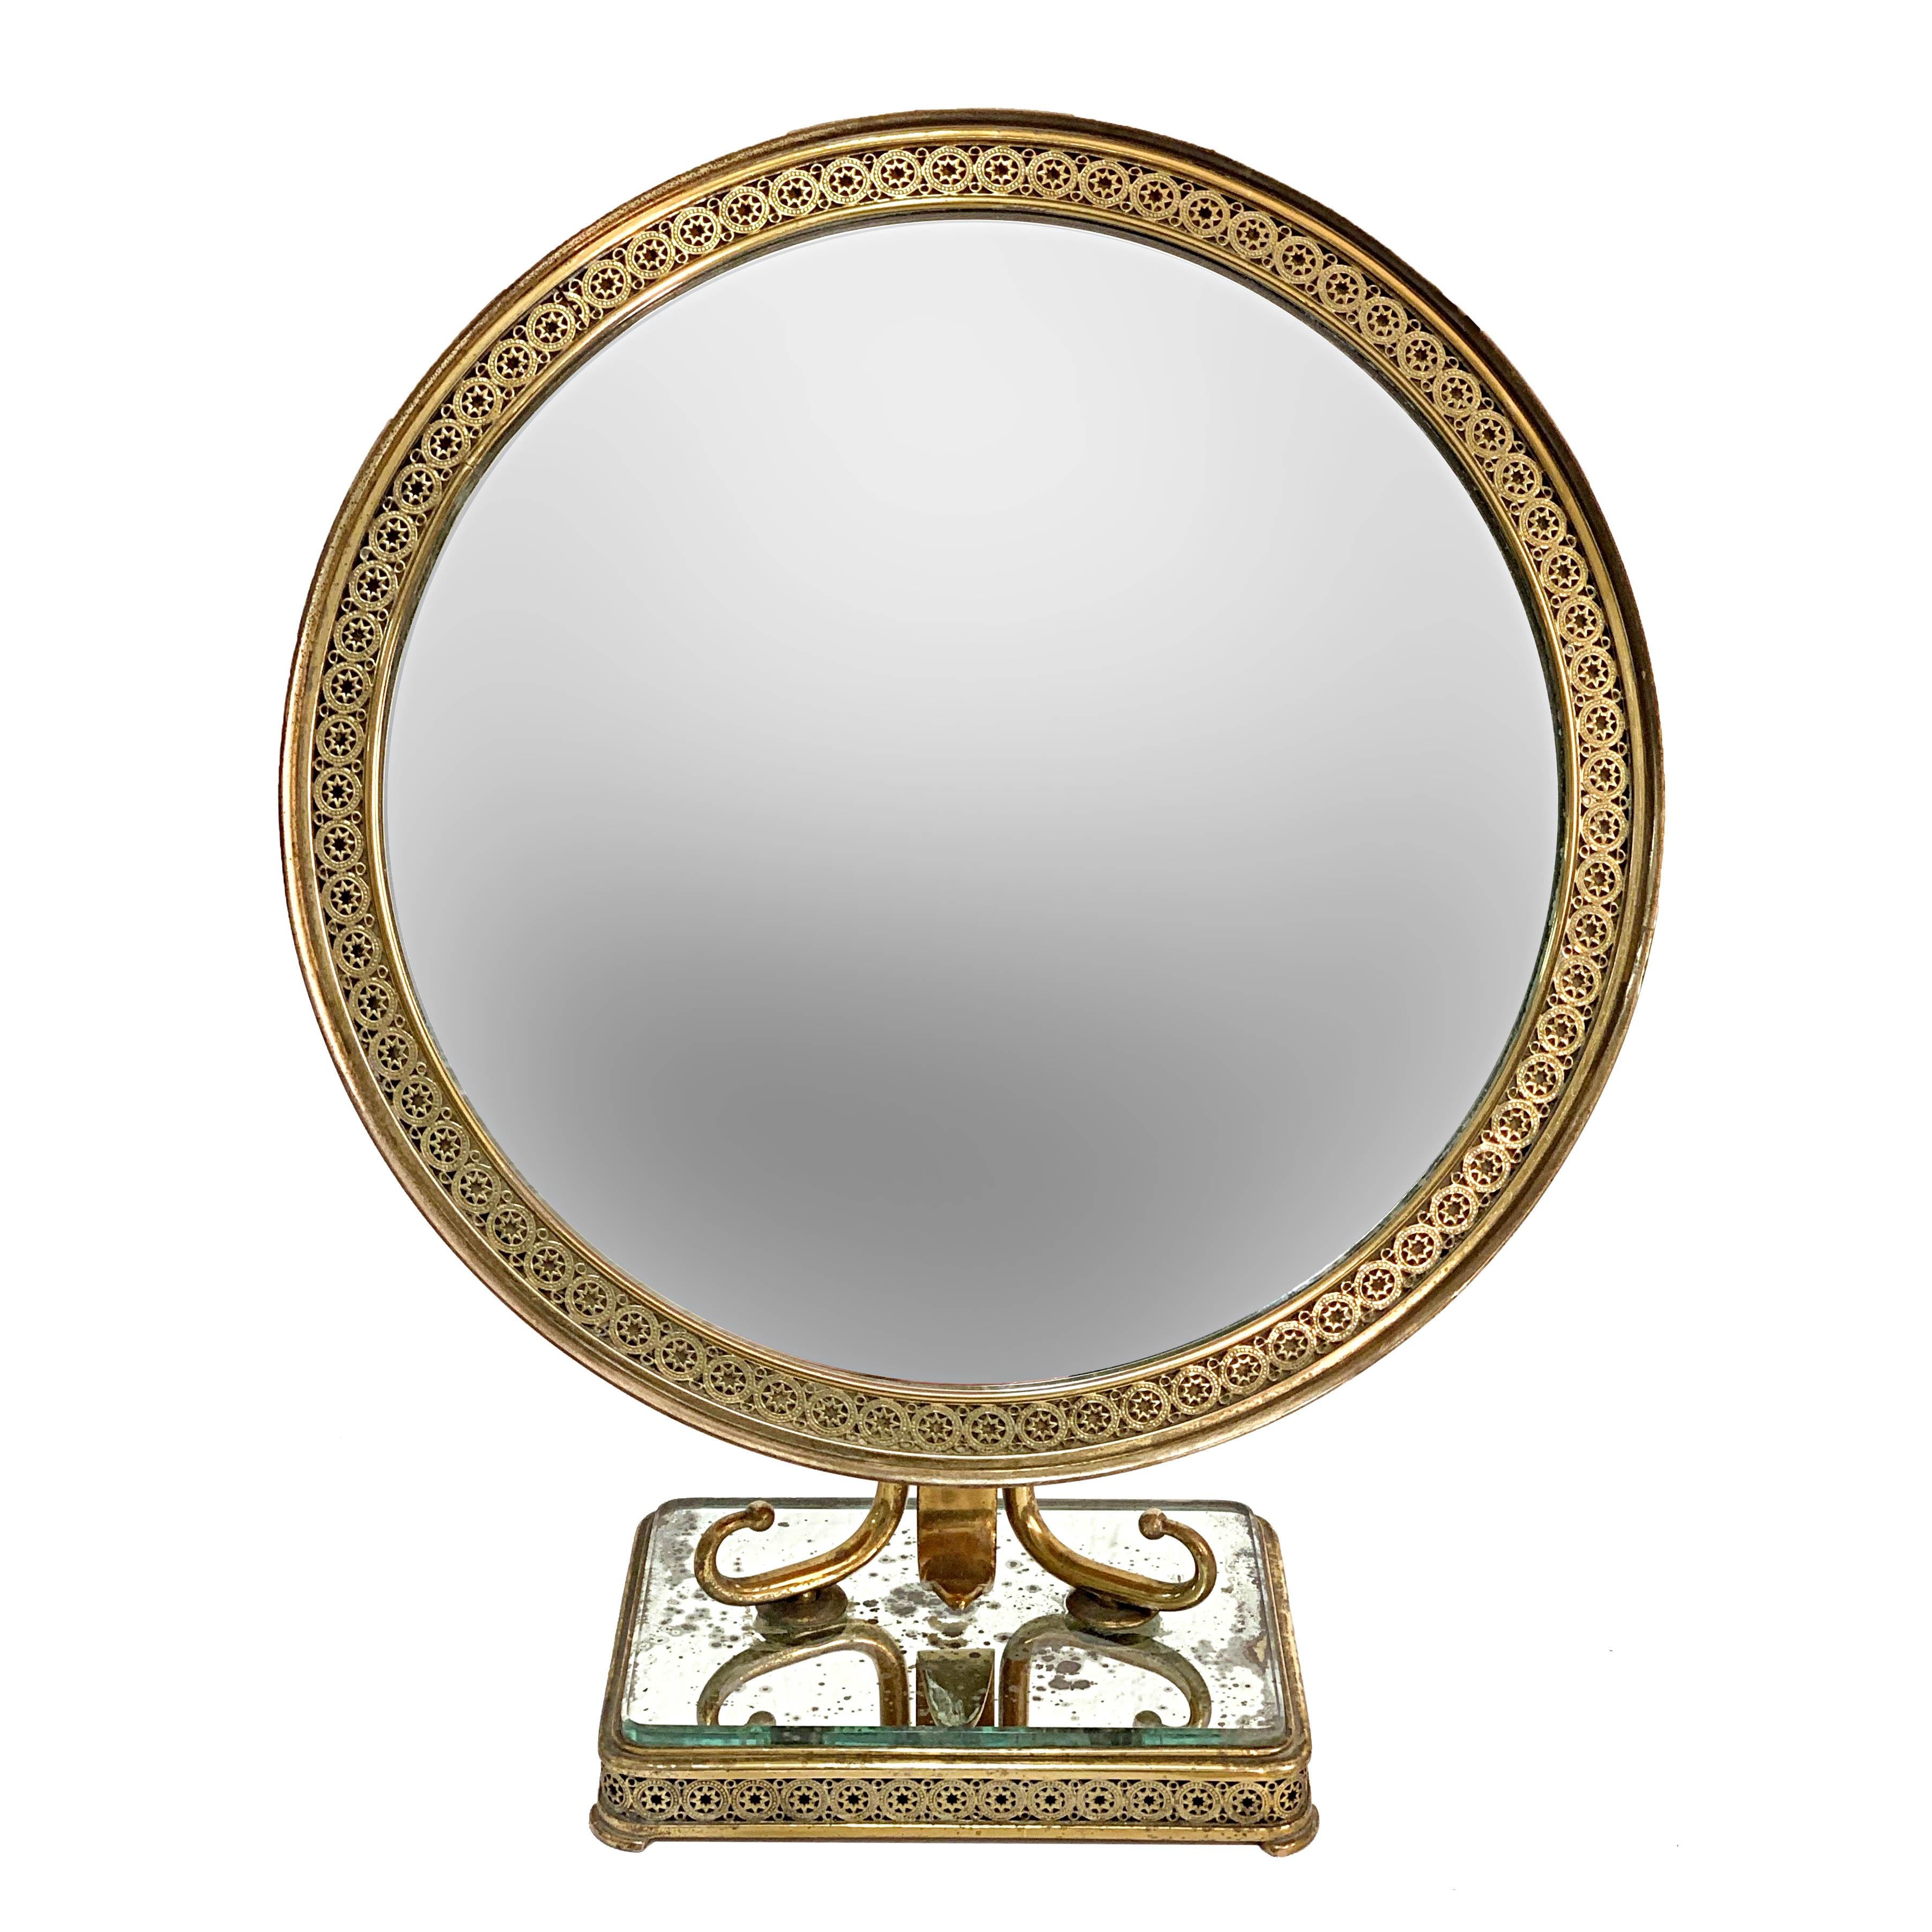 Wonderful neoclassical brass and wood Italian vanity table mirror.

This elegant table or make up mirror was designed and manufactured in Italy in the 1950s. The mirror has a solid two-column brass structure and a wooden base.

This item is the